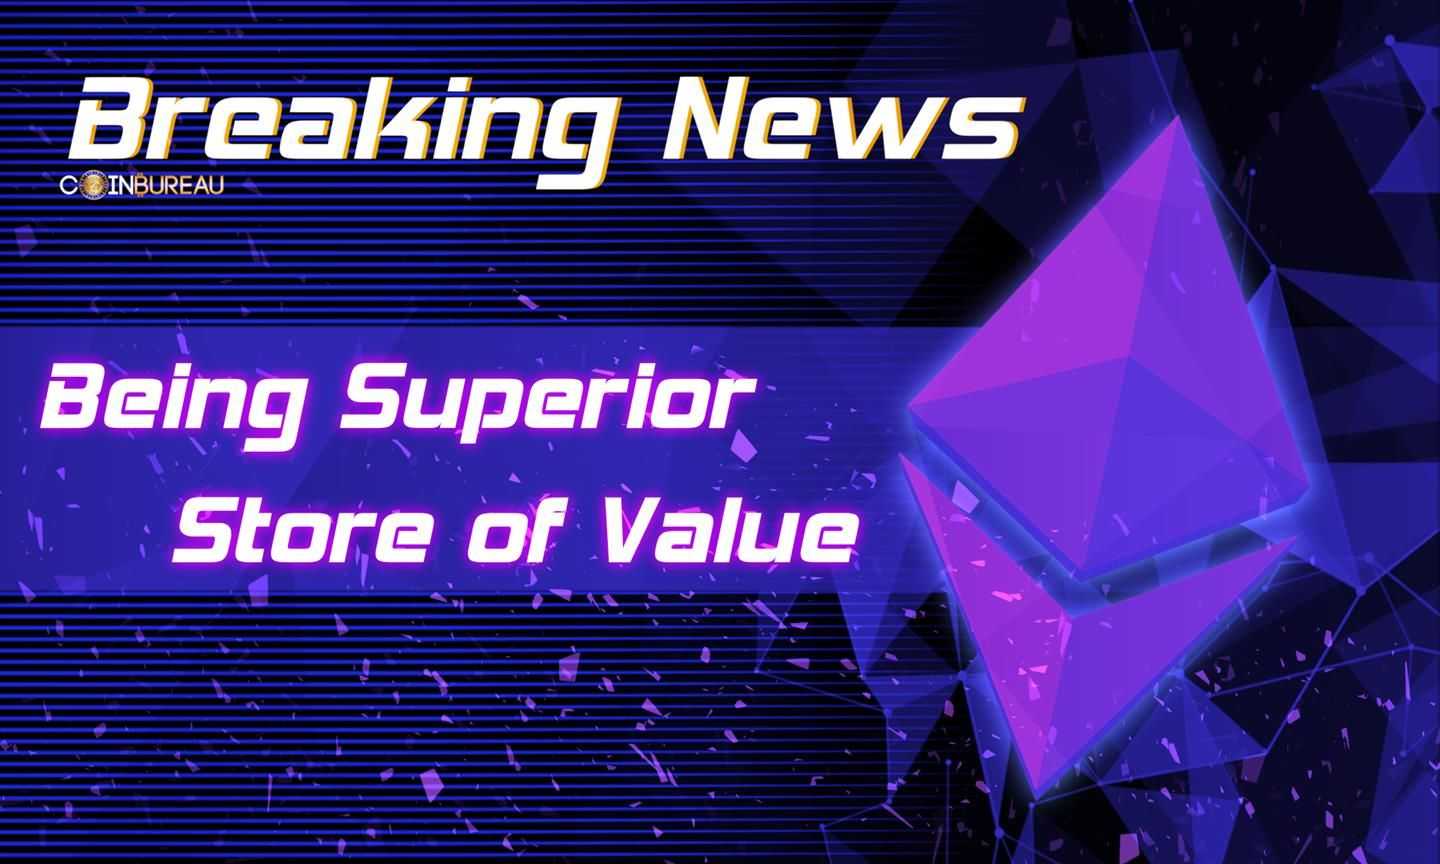 Researchers Say Ethereum Superior Store of Value vs Bitcoin